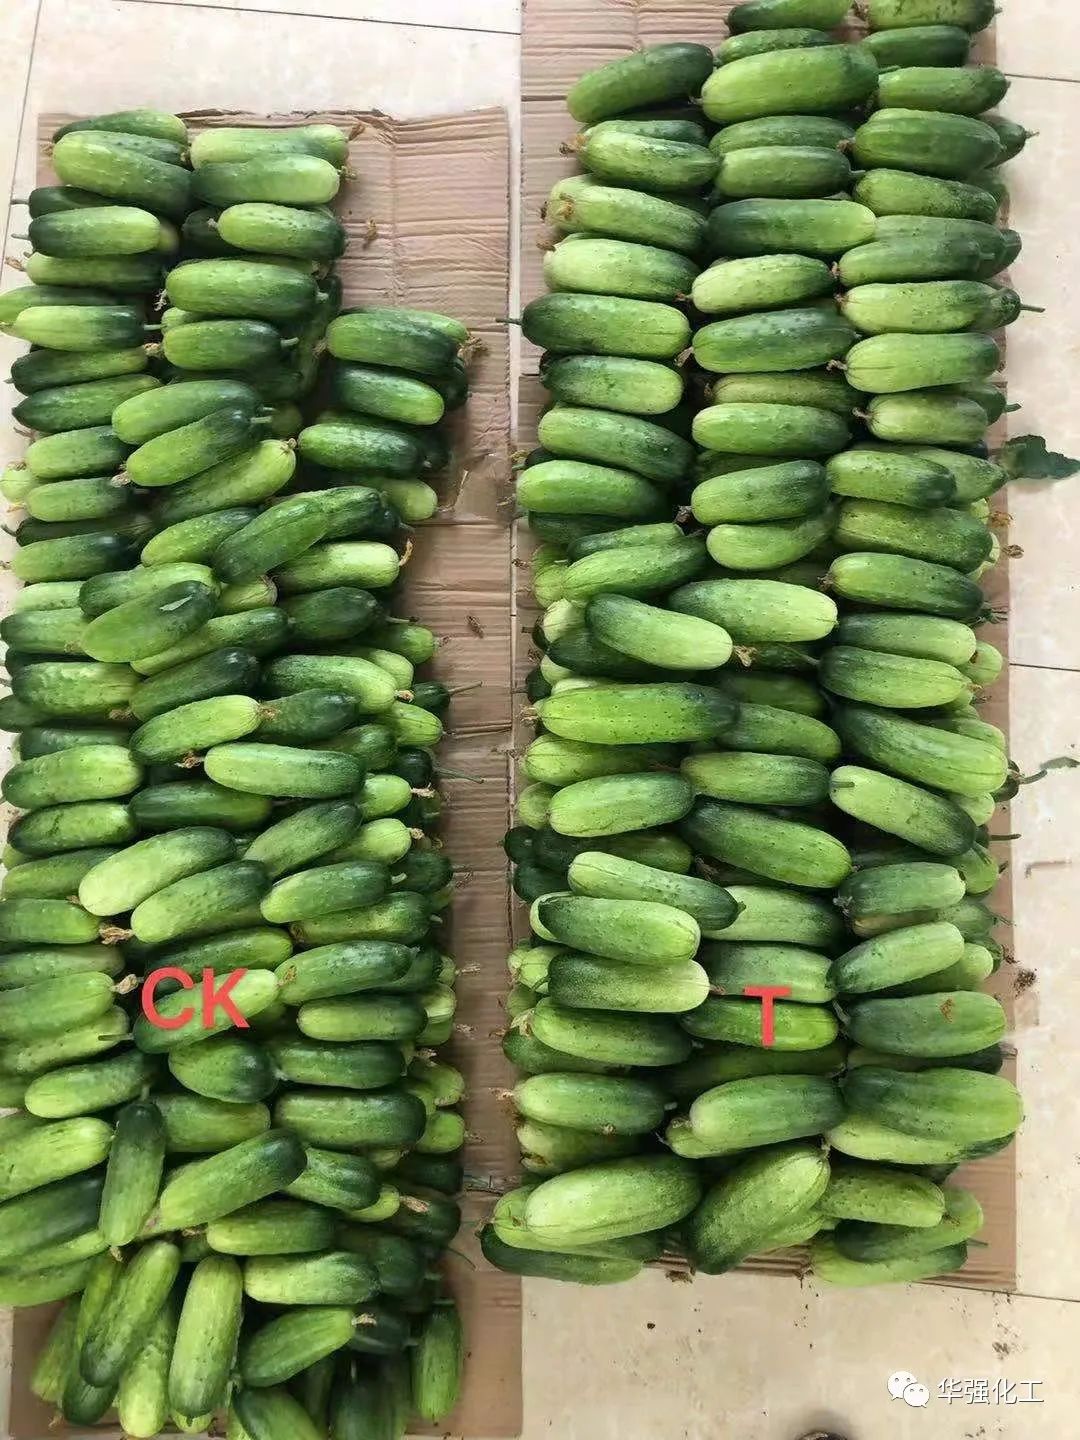 The company's new compound fertilizer helps cucumber value-added and efficiency gain high yield